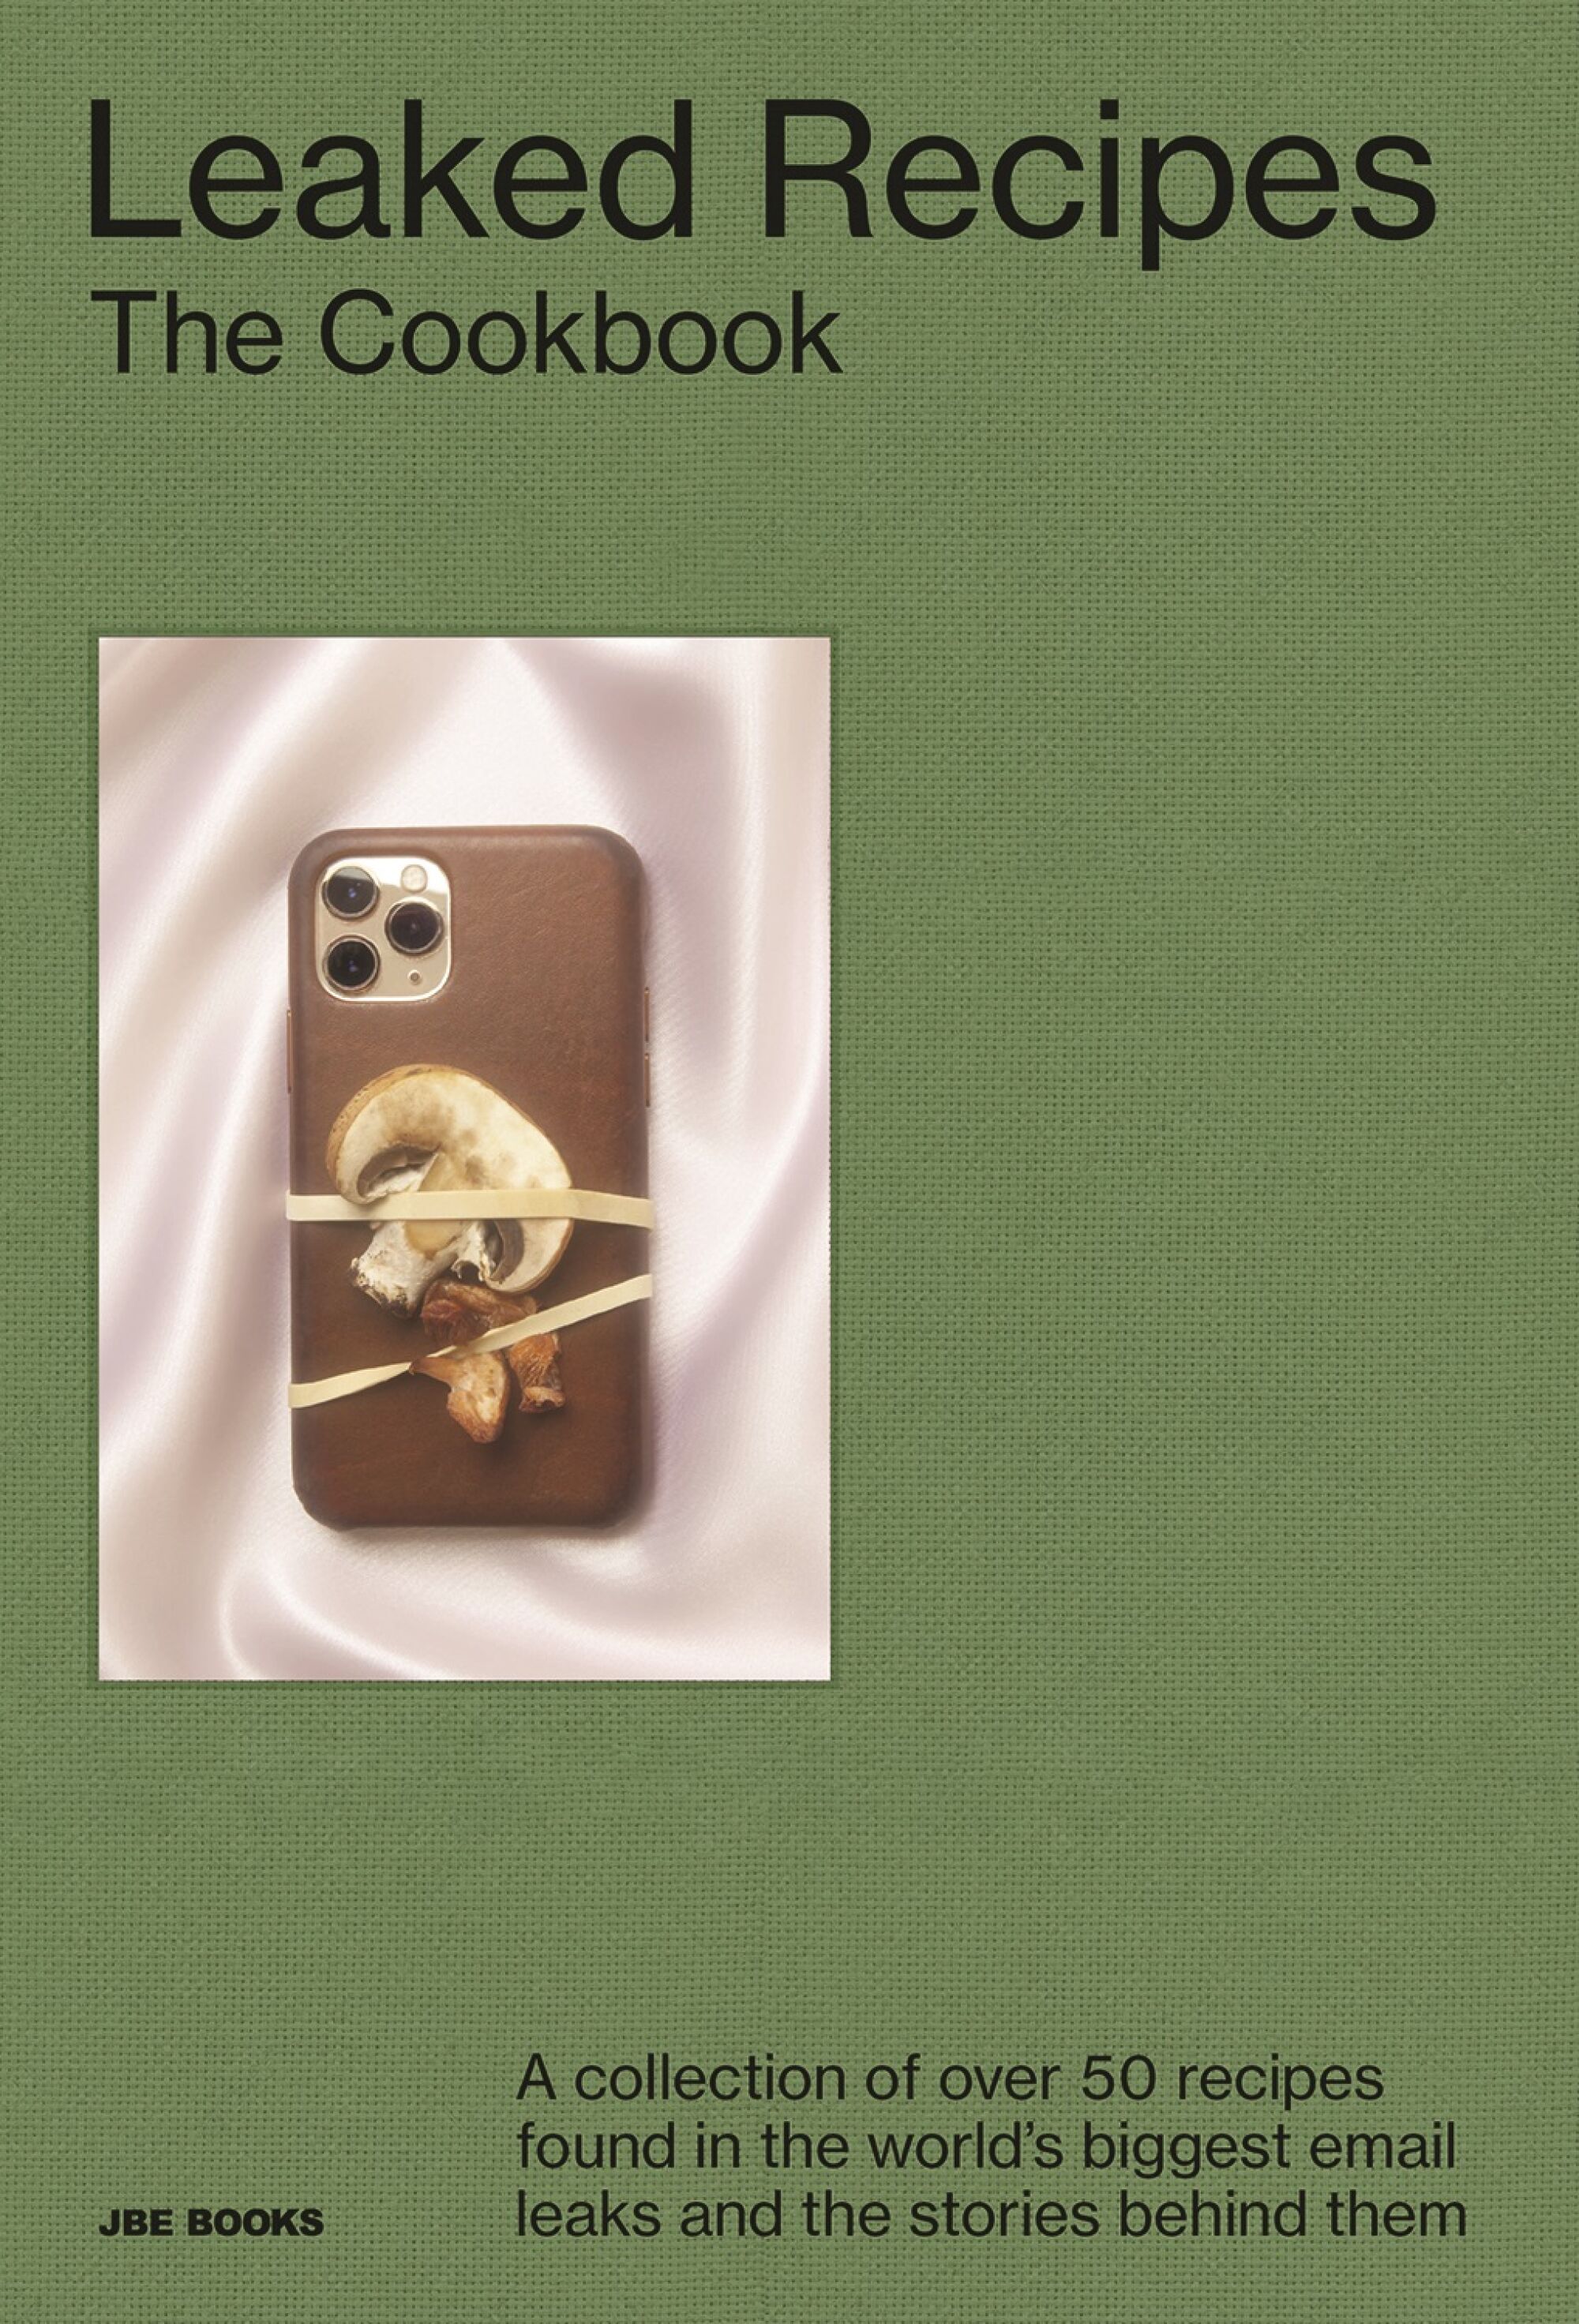 A green book cover with a photo of an iPhone on it